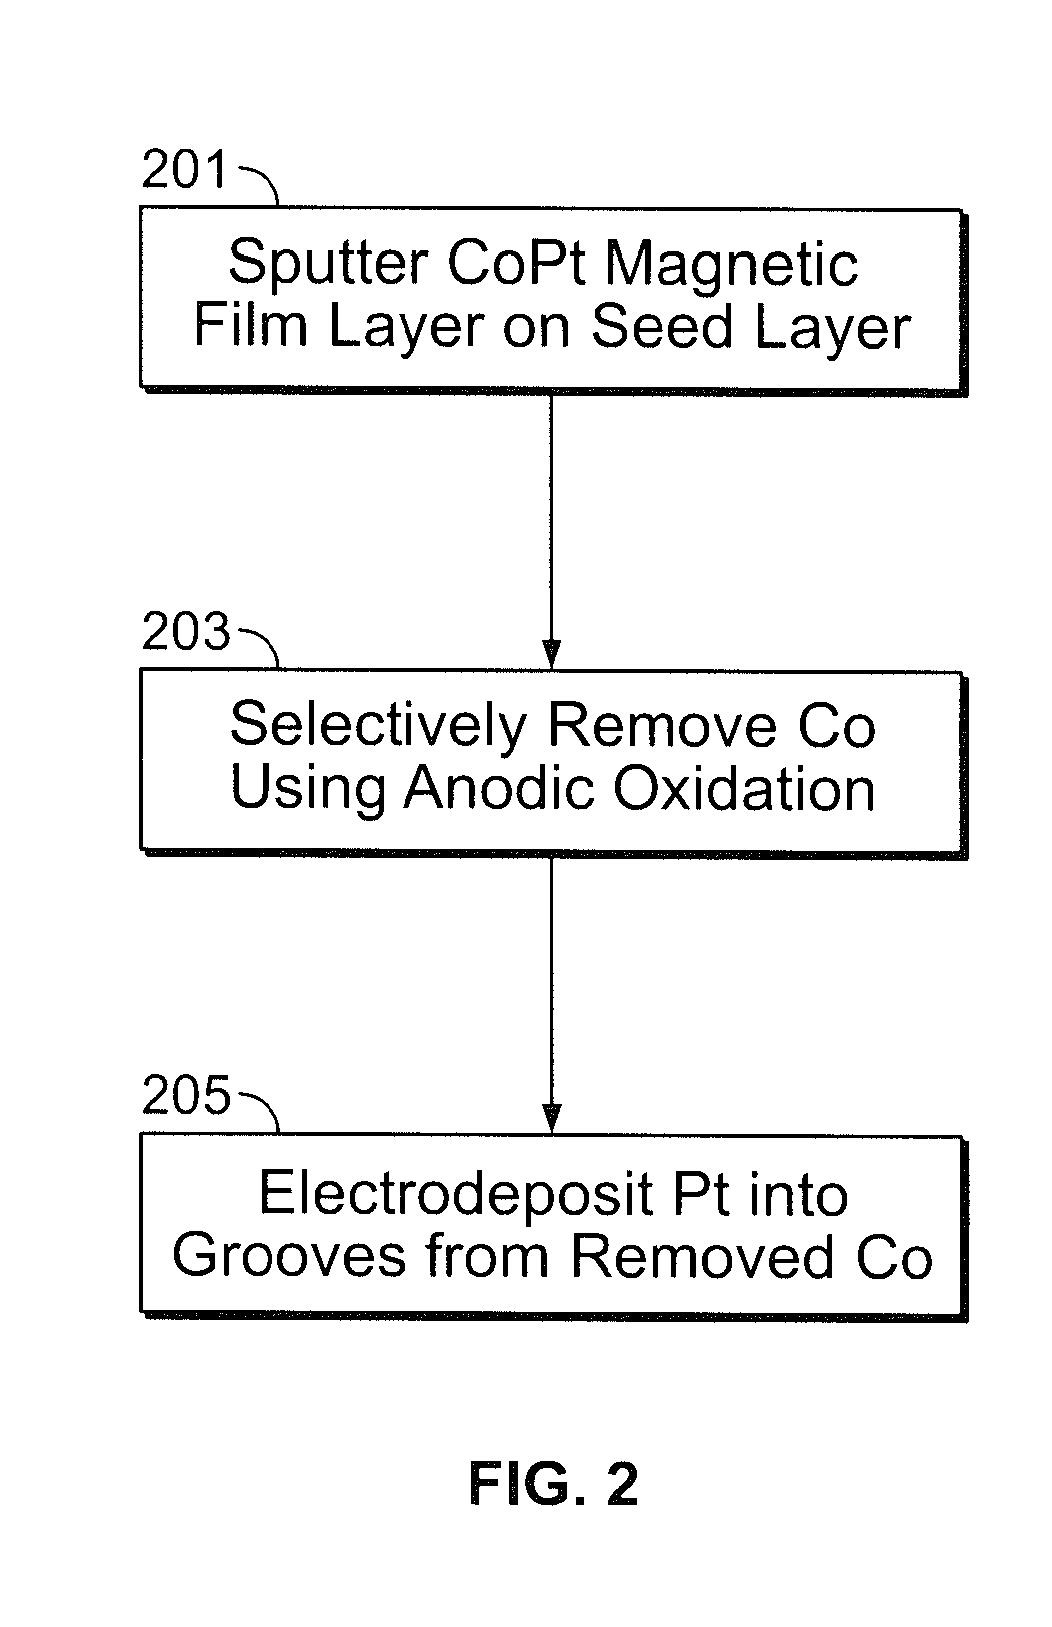 Formation of patterned media by selective anodic removal followed by targeted trench backfill